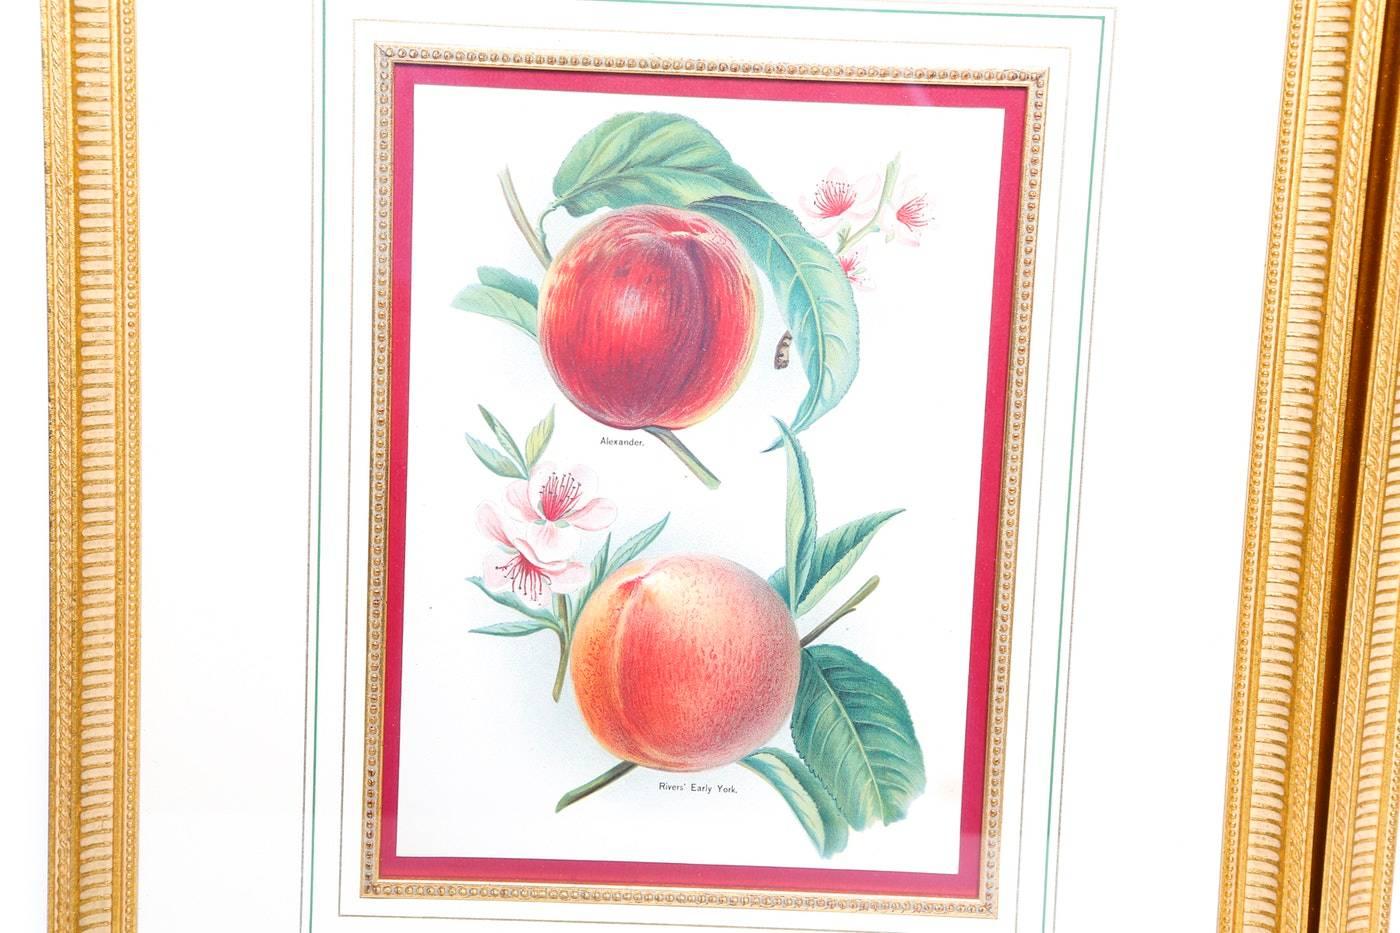 A pair of framed prints of 19th century lithographs, Belgium, circa 1870. The two prints depict five different peaches; the first Alexander and Rivers' Early York and the second Crimson Galande, Royal George and Alexandra Noblesse (Rivers). Each